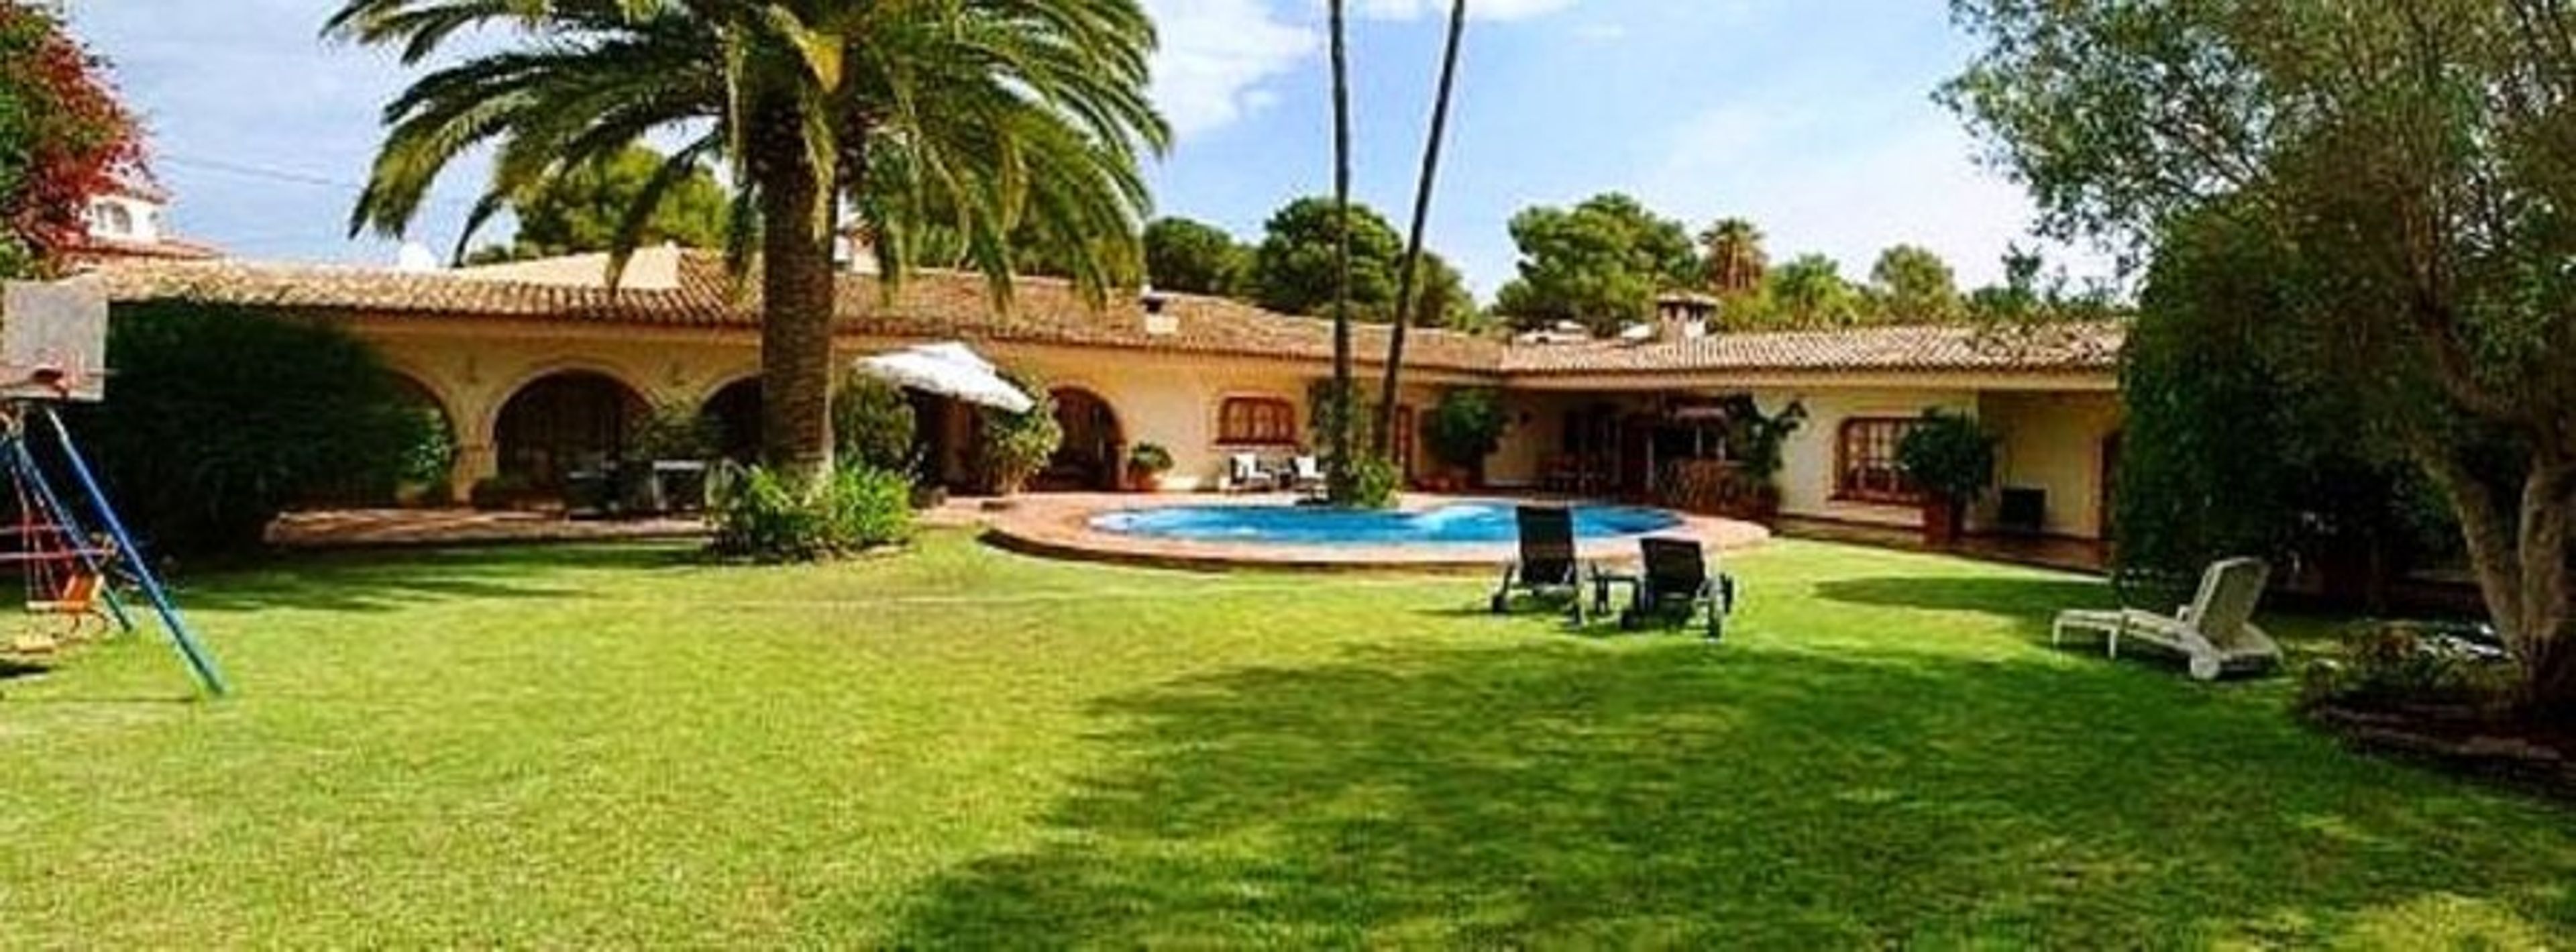 Our lovely villa. Peace and Privacy - beaches and town 10 mins walk